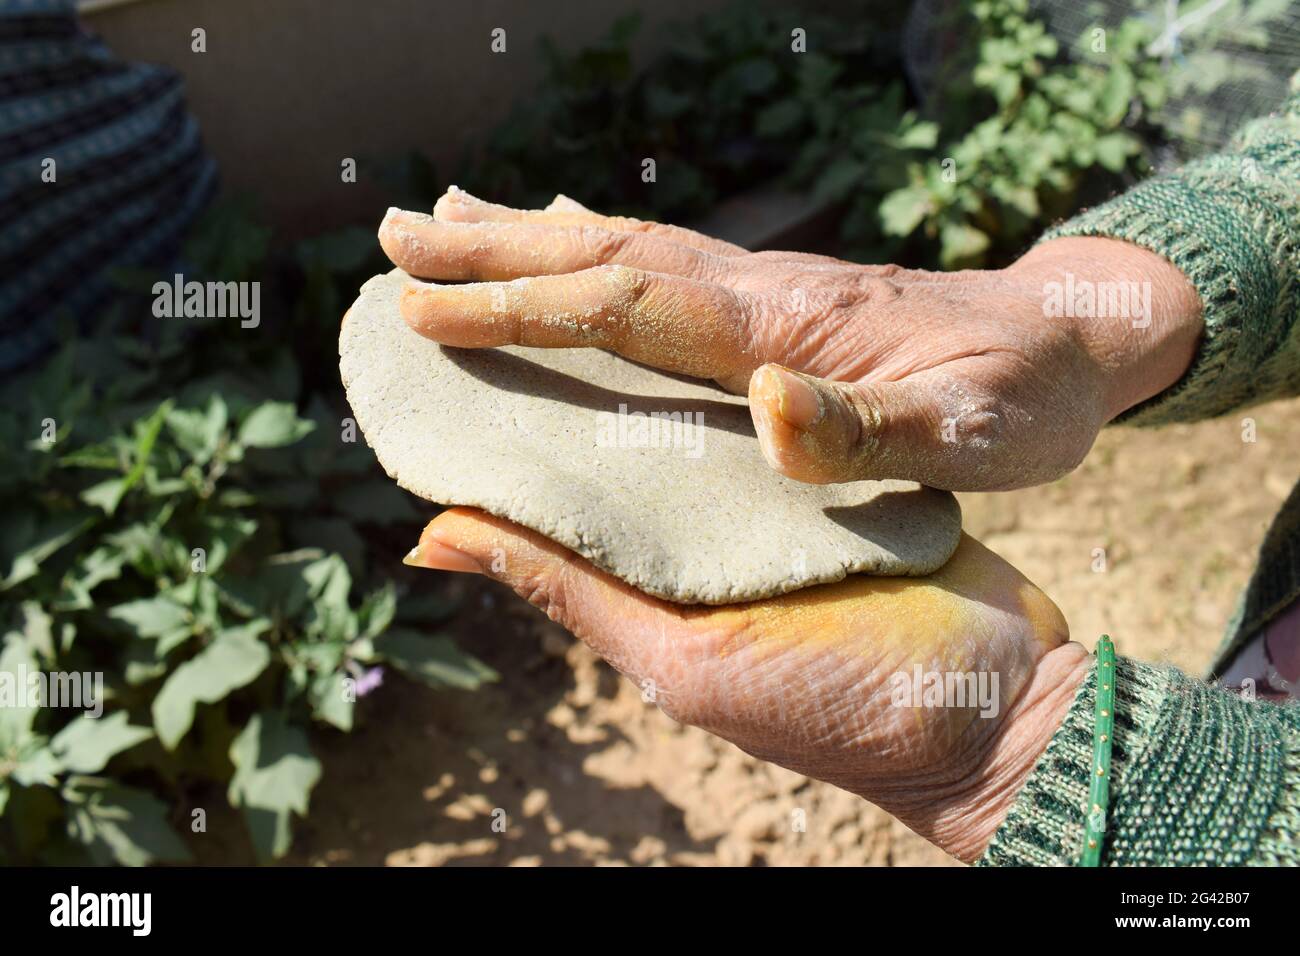 Woman making Indian or Pakistani flatbread made of pearl millet known as Bajre ki roti. Dough is flattened with hands to make round circle. Village st Stock Photo